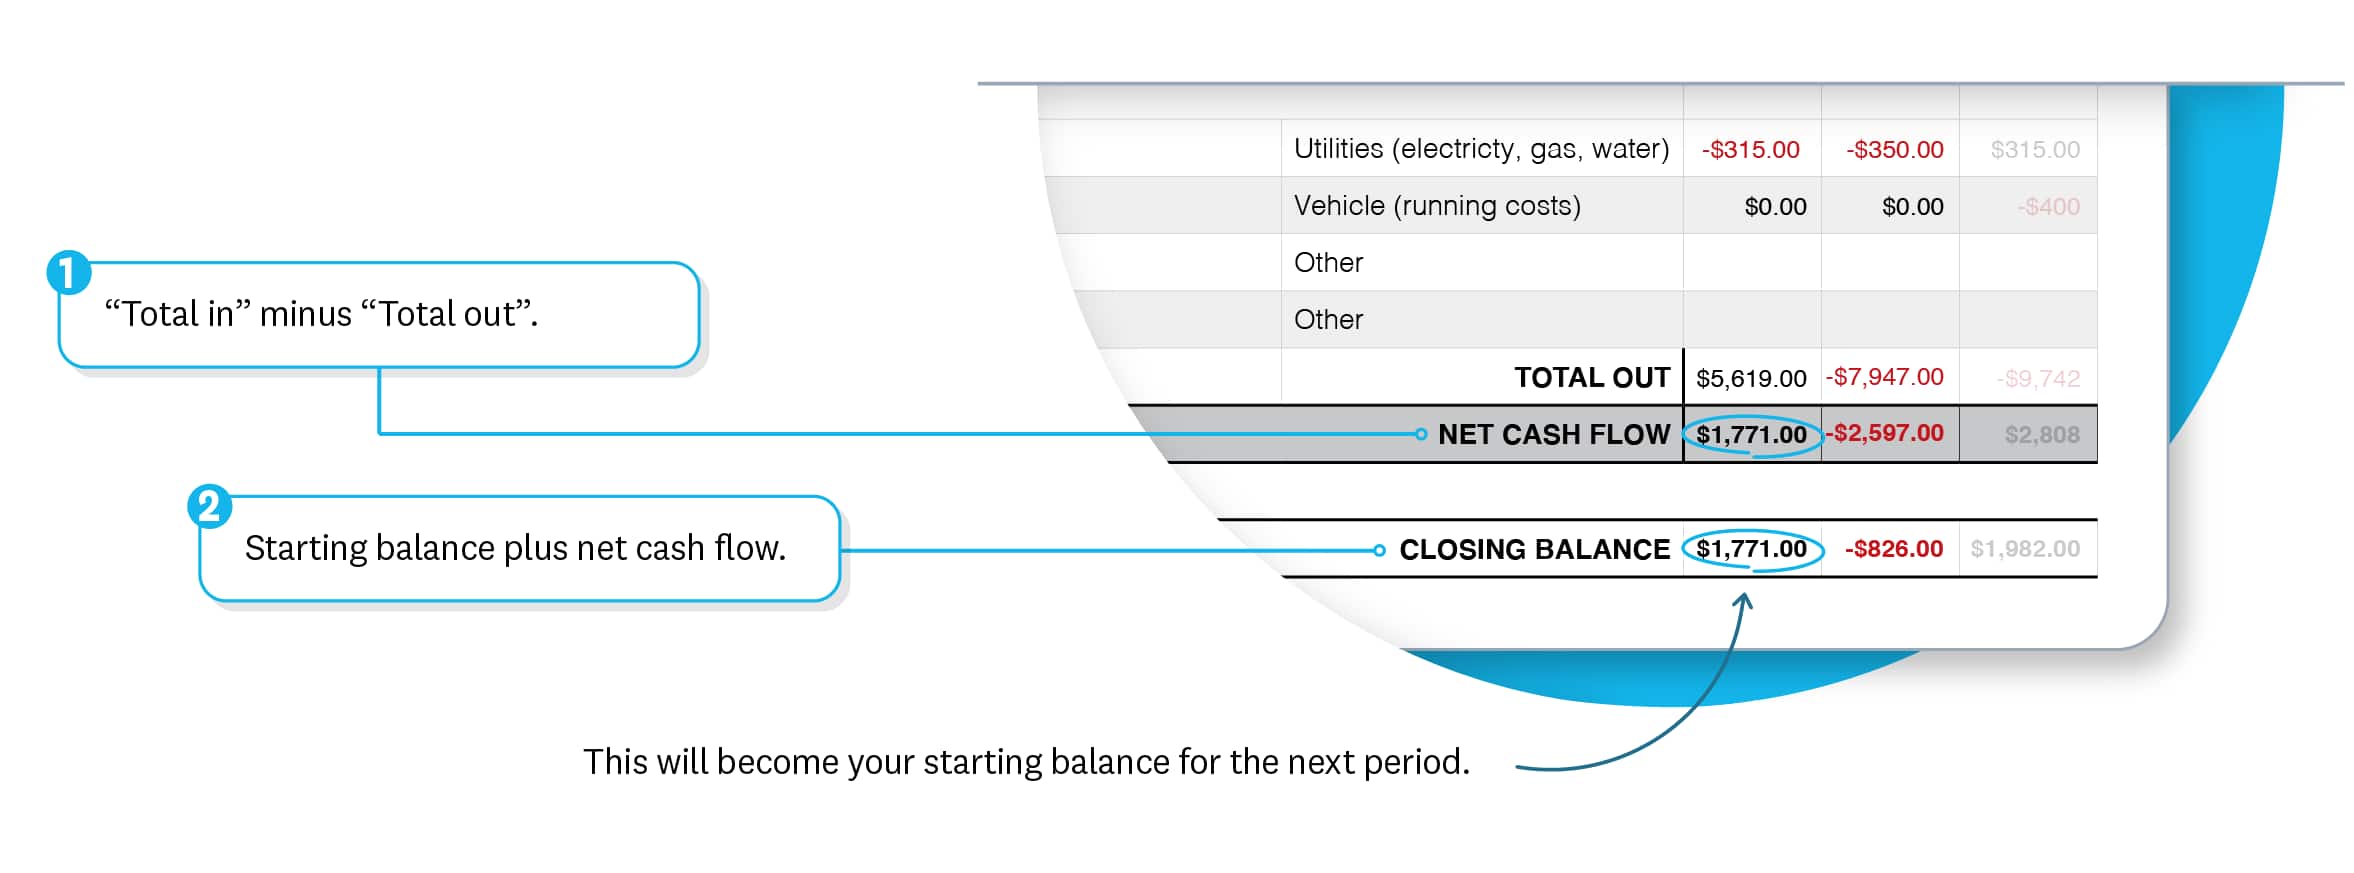 Cash flow projection results show total cash in minus total cash out to give you a net cash flow and a closing balance. 